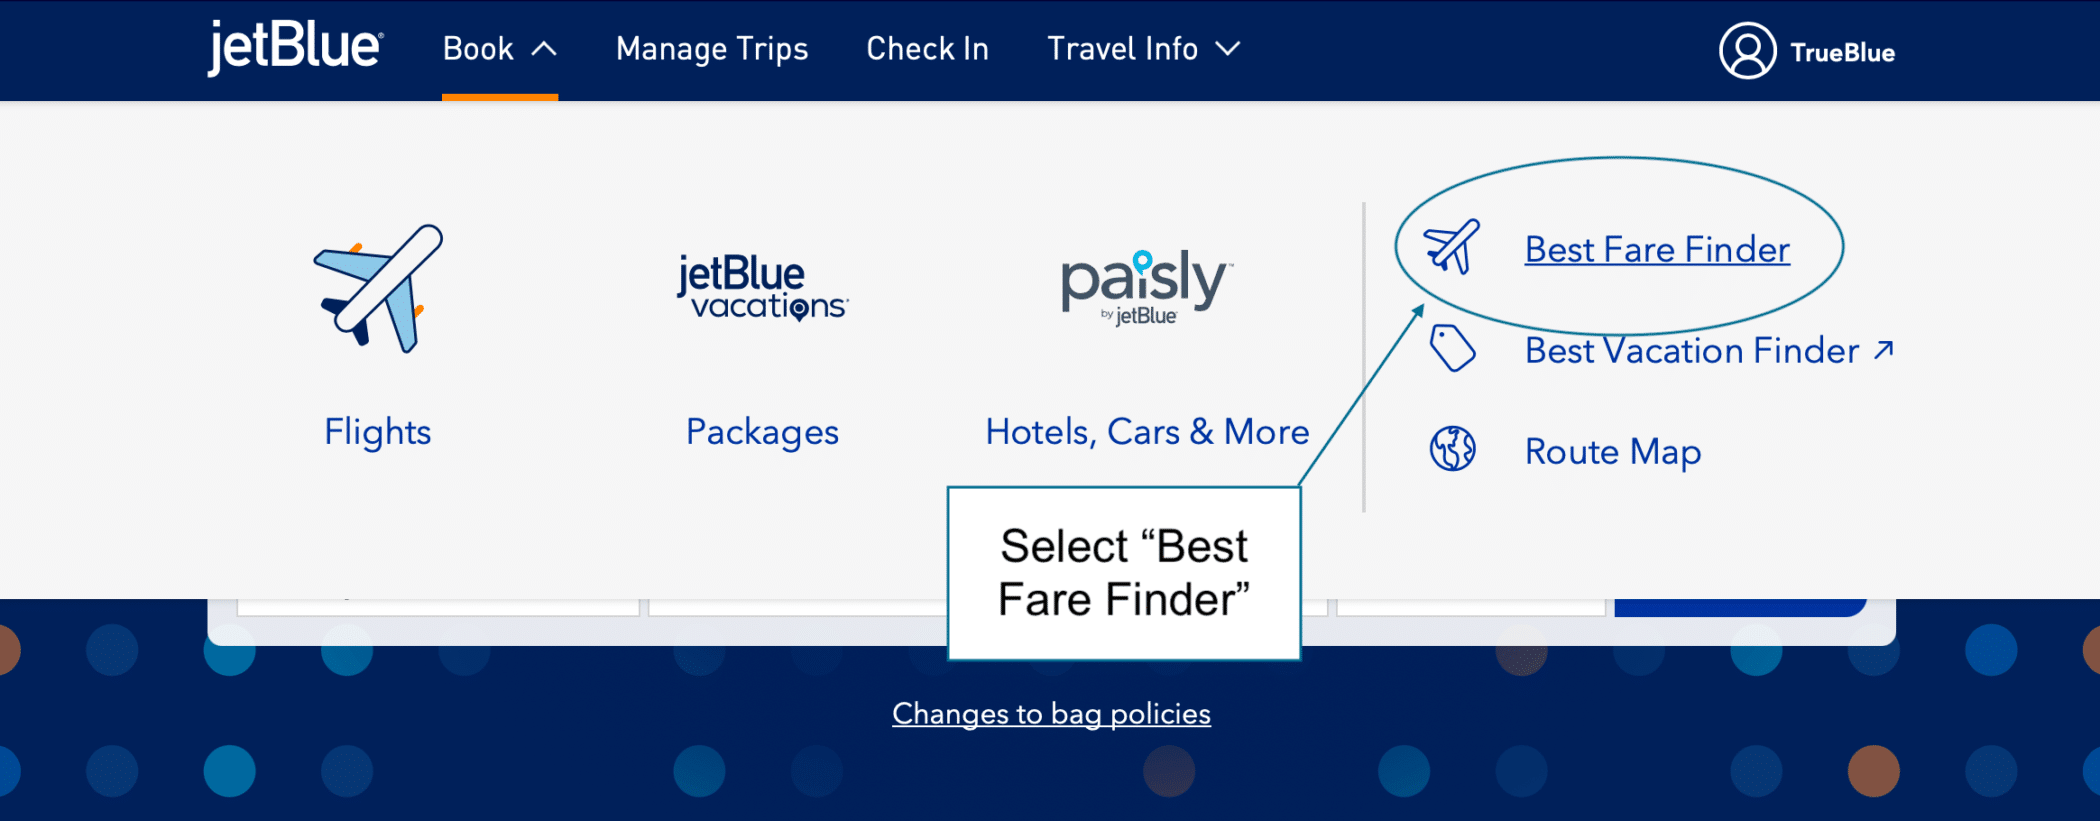 Navigating to JetBlue Best Fare Finder from the JetBlue homepage